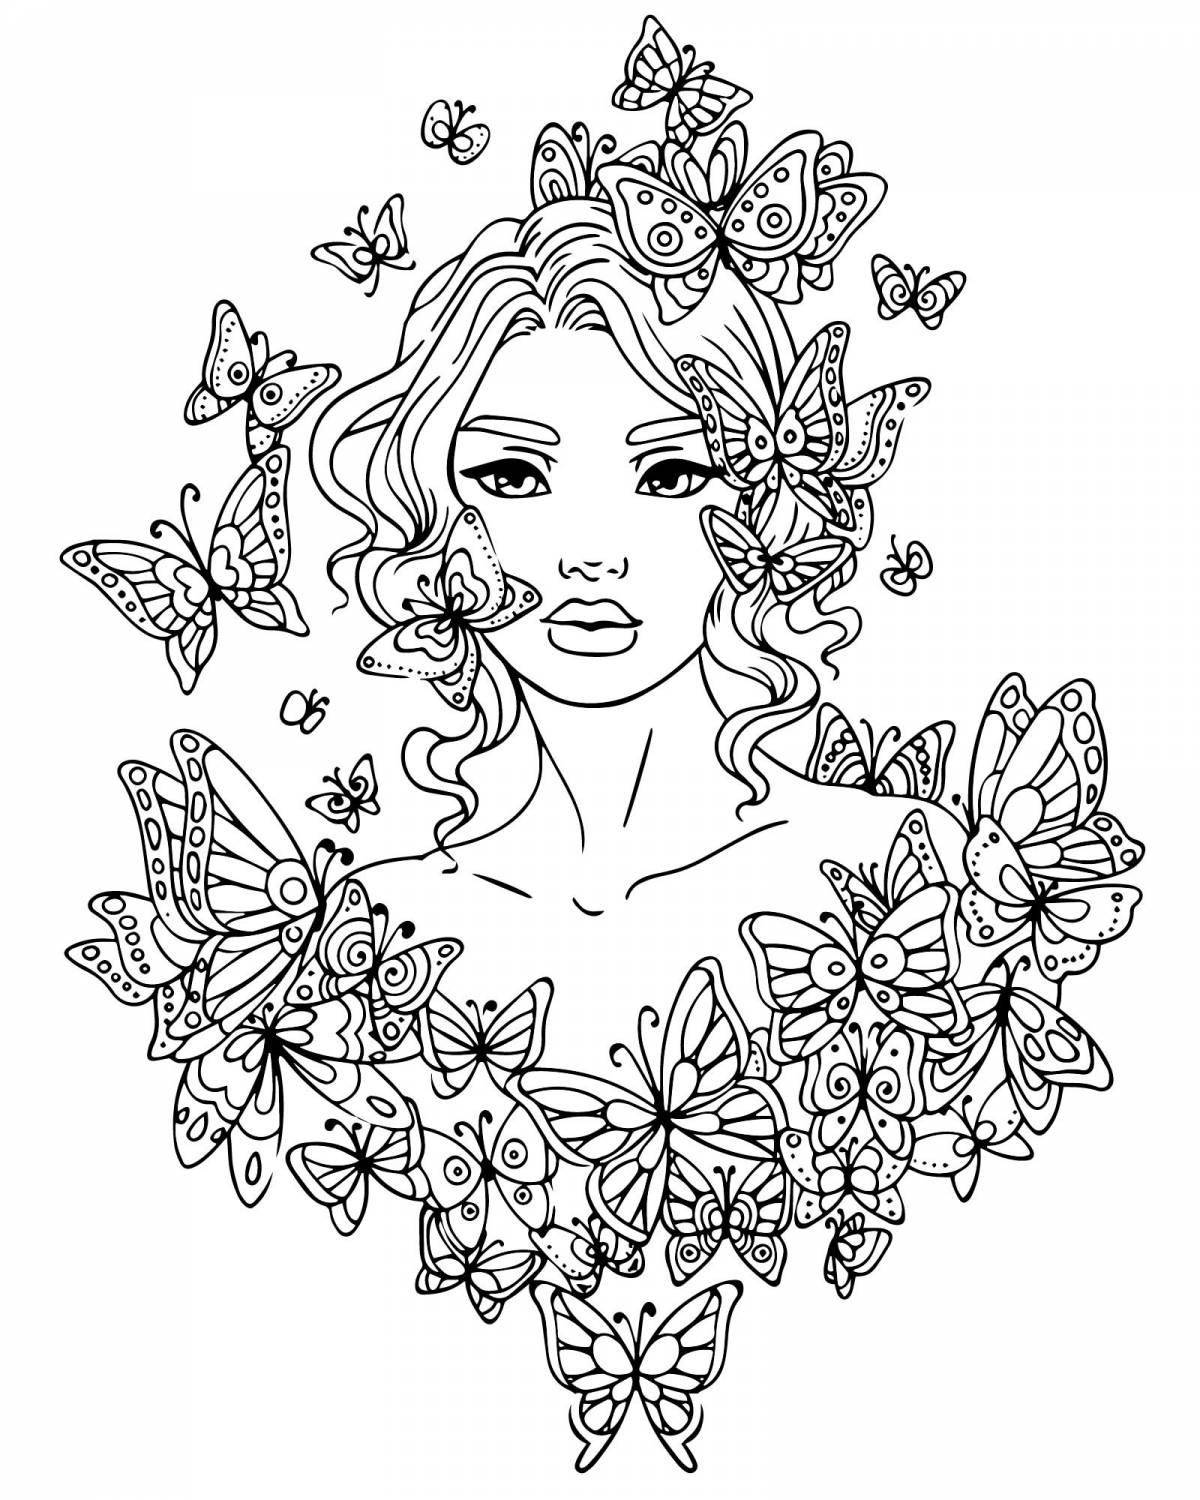 Charming anti-stress coloring book for girls 13 years old